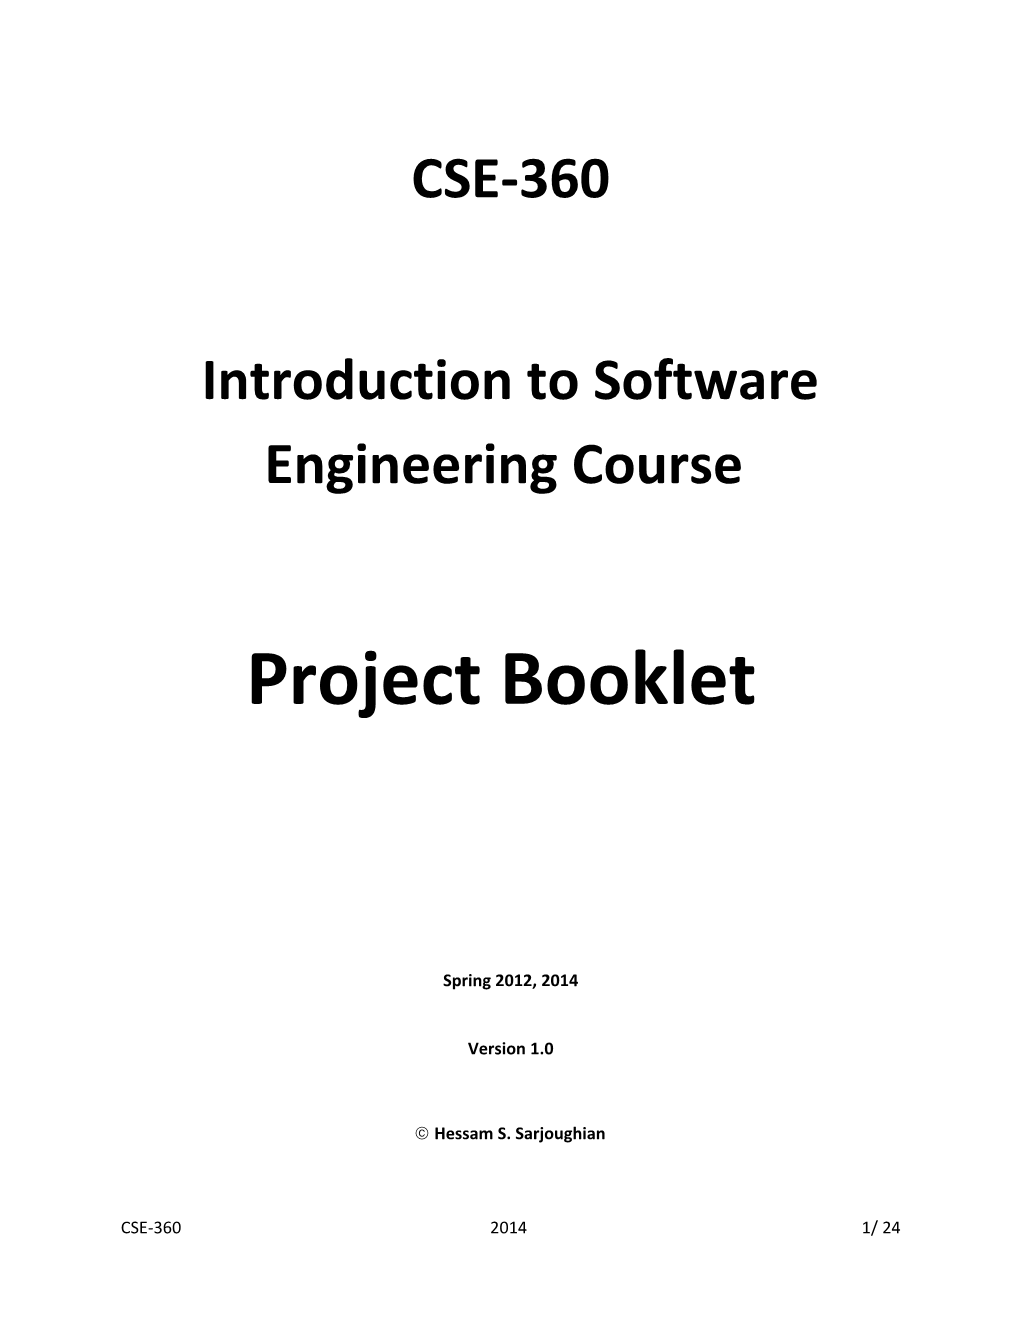 CSE-360 Introduction to Software Engineering